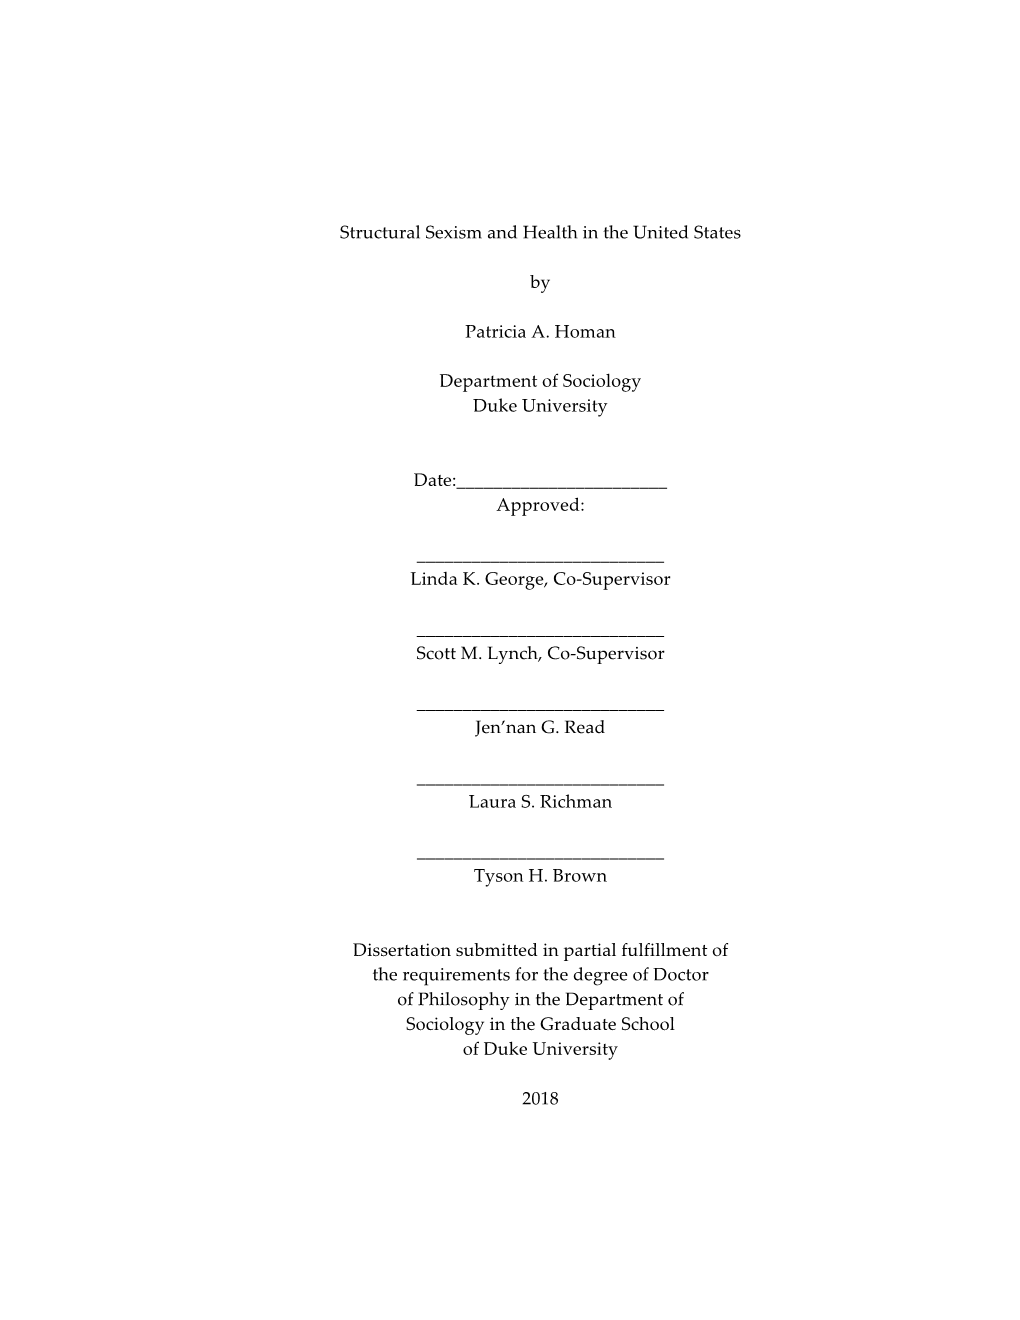 Structural Sexism and Health in the United States by Patricia A. Homan